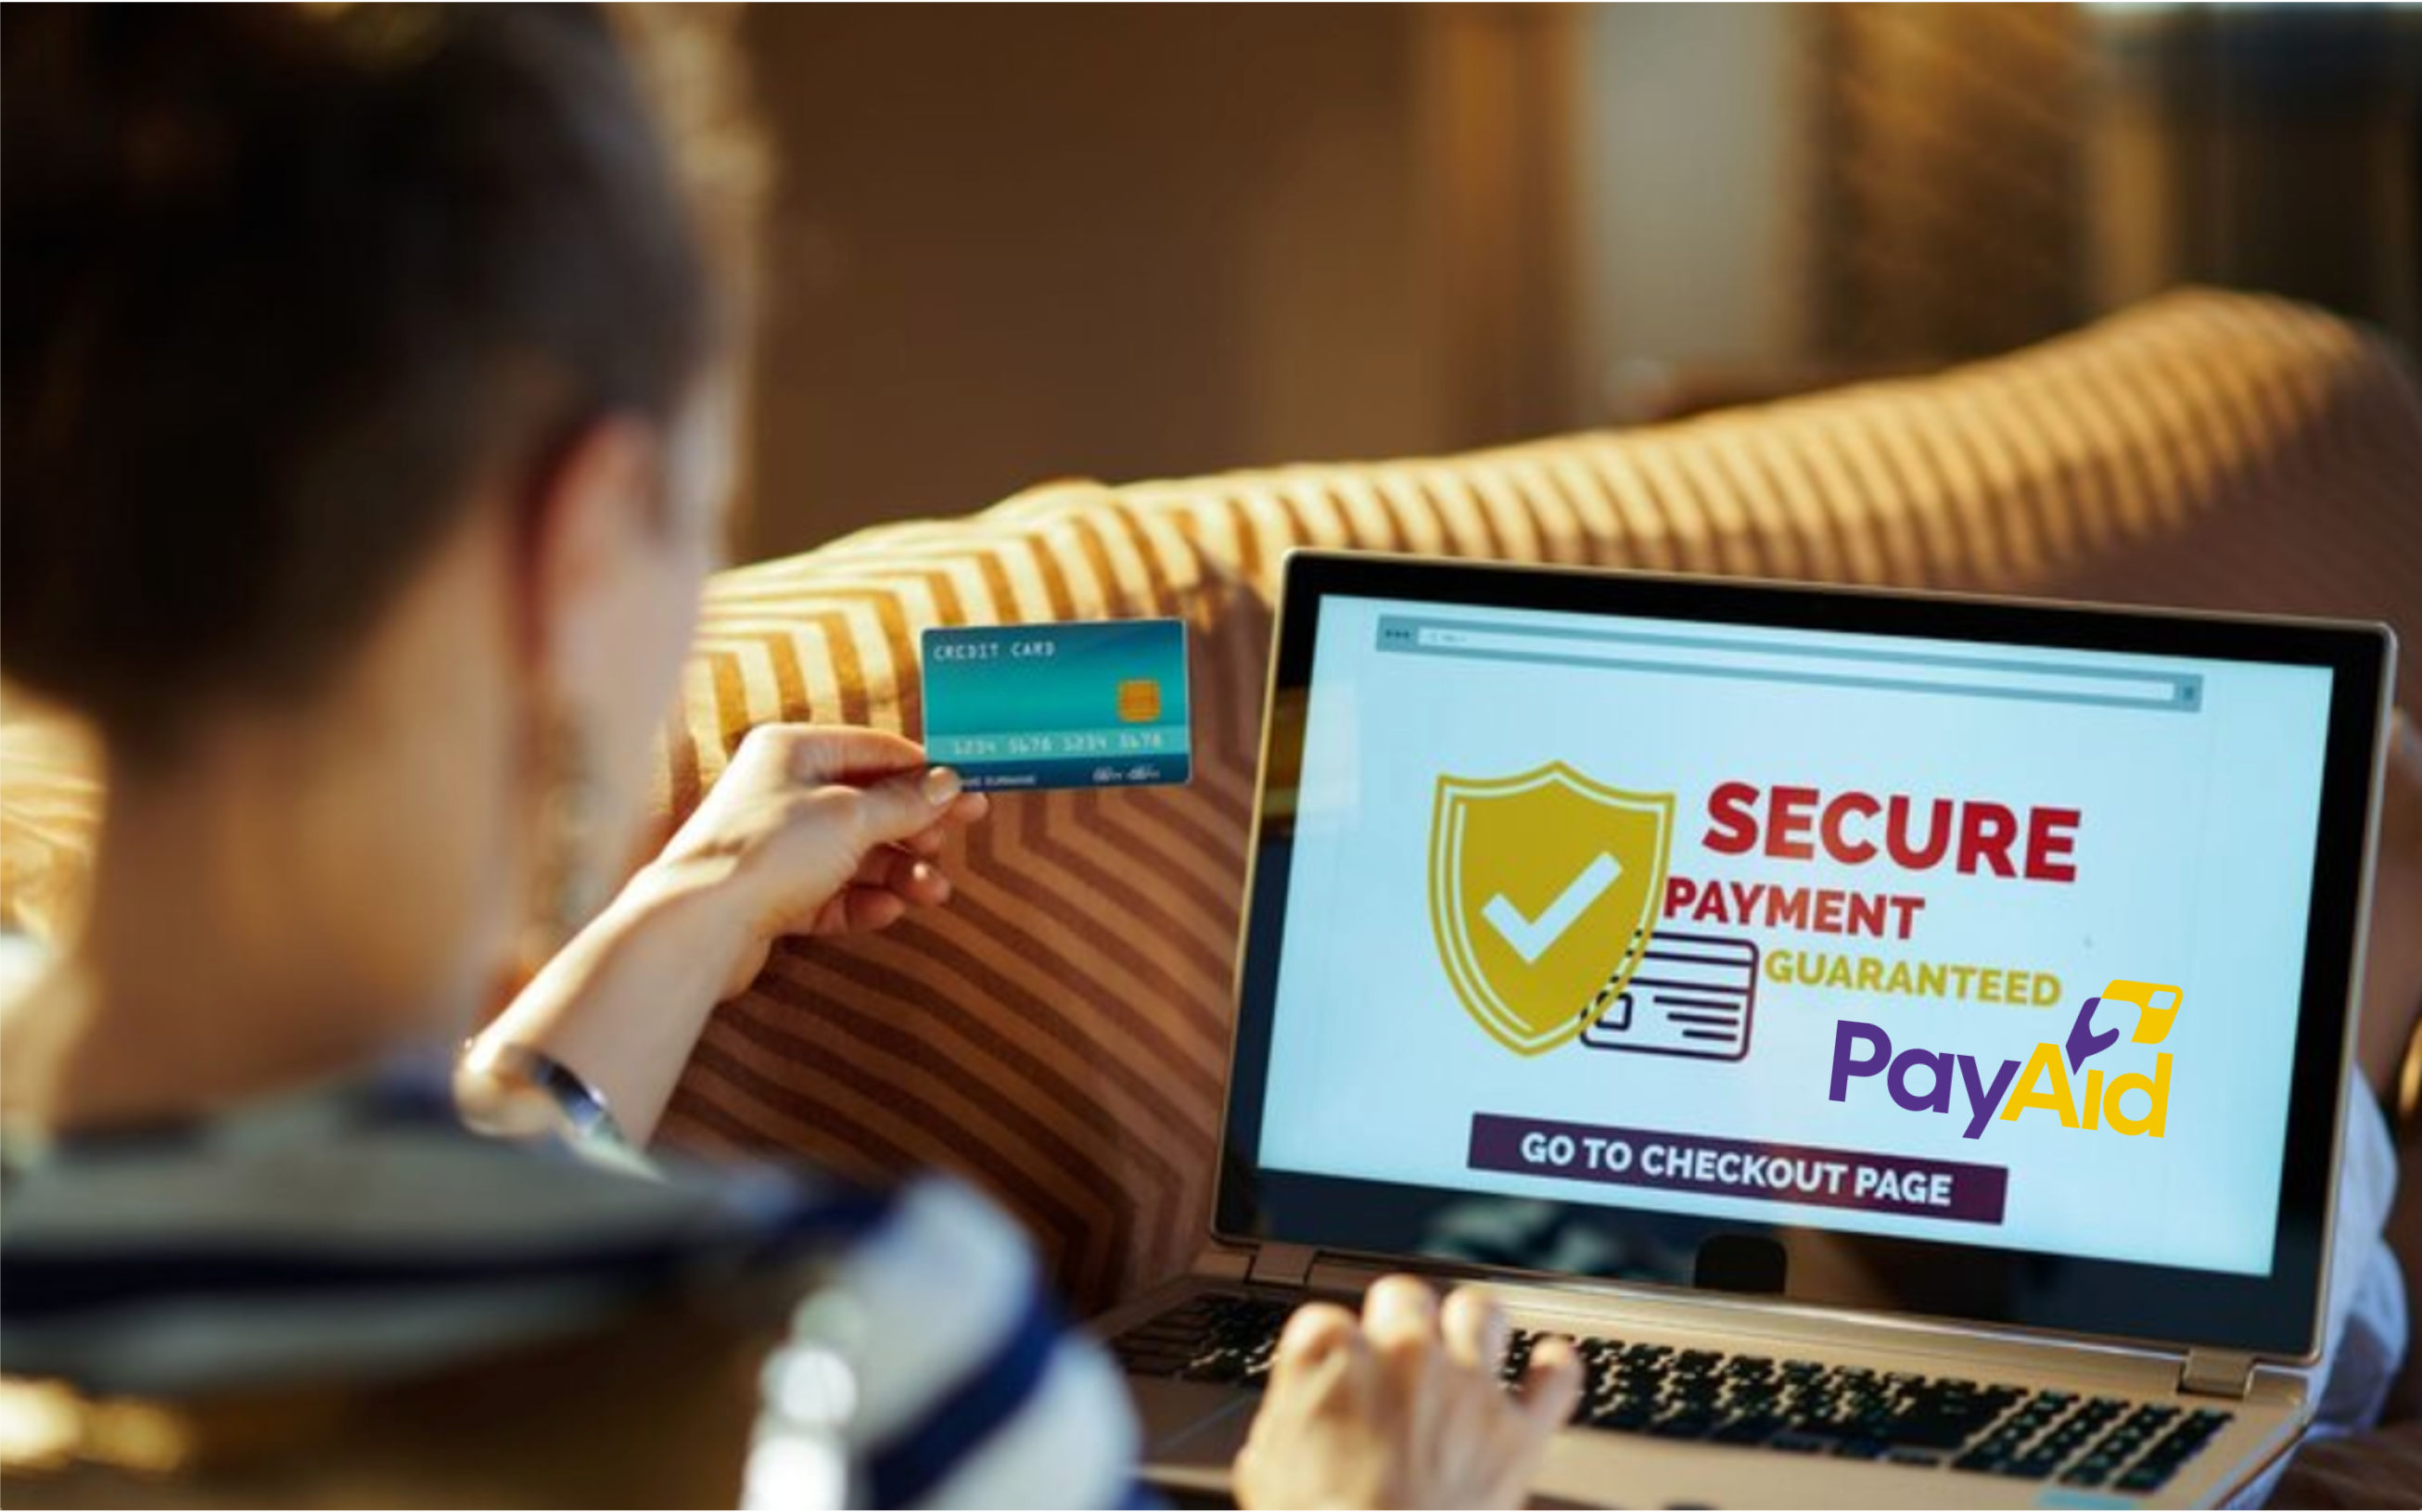 How does Payaid Payments offer a secure online payment solutions?